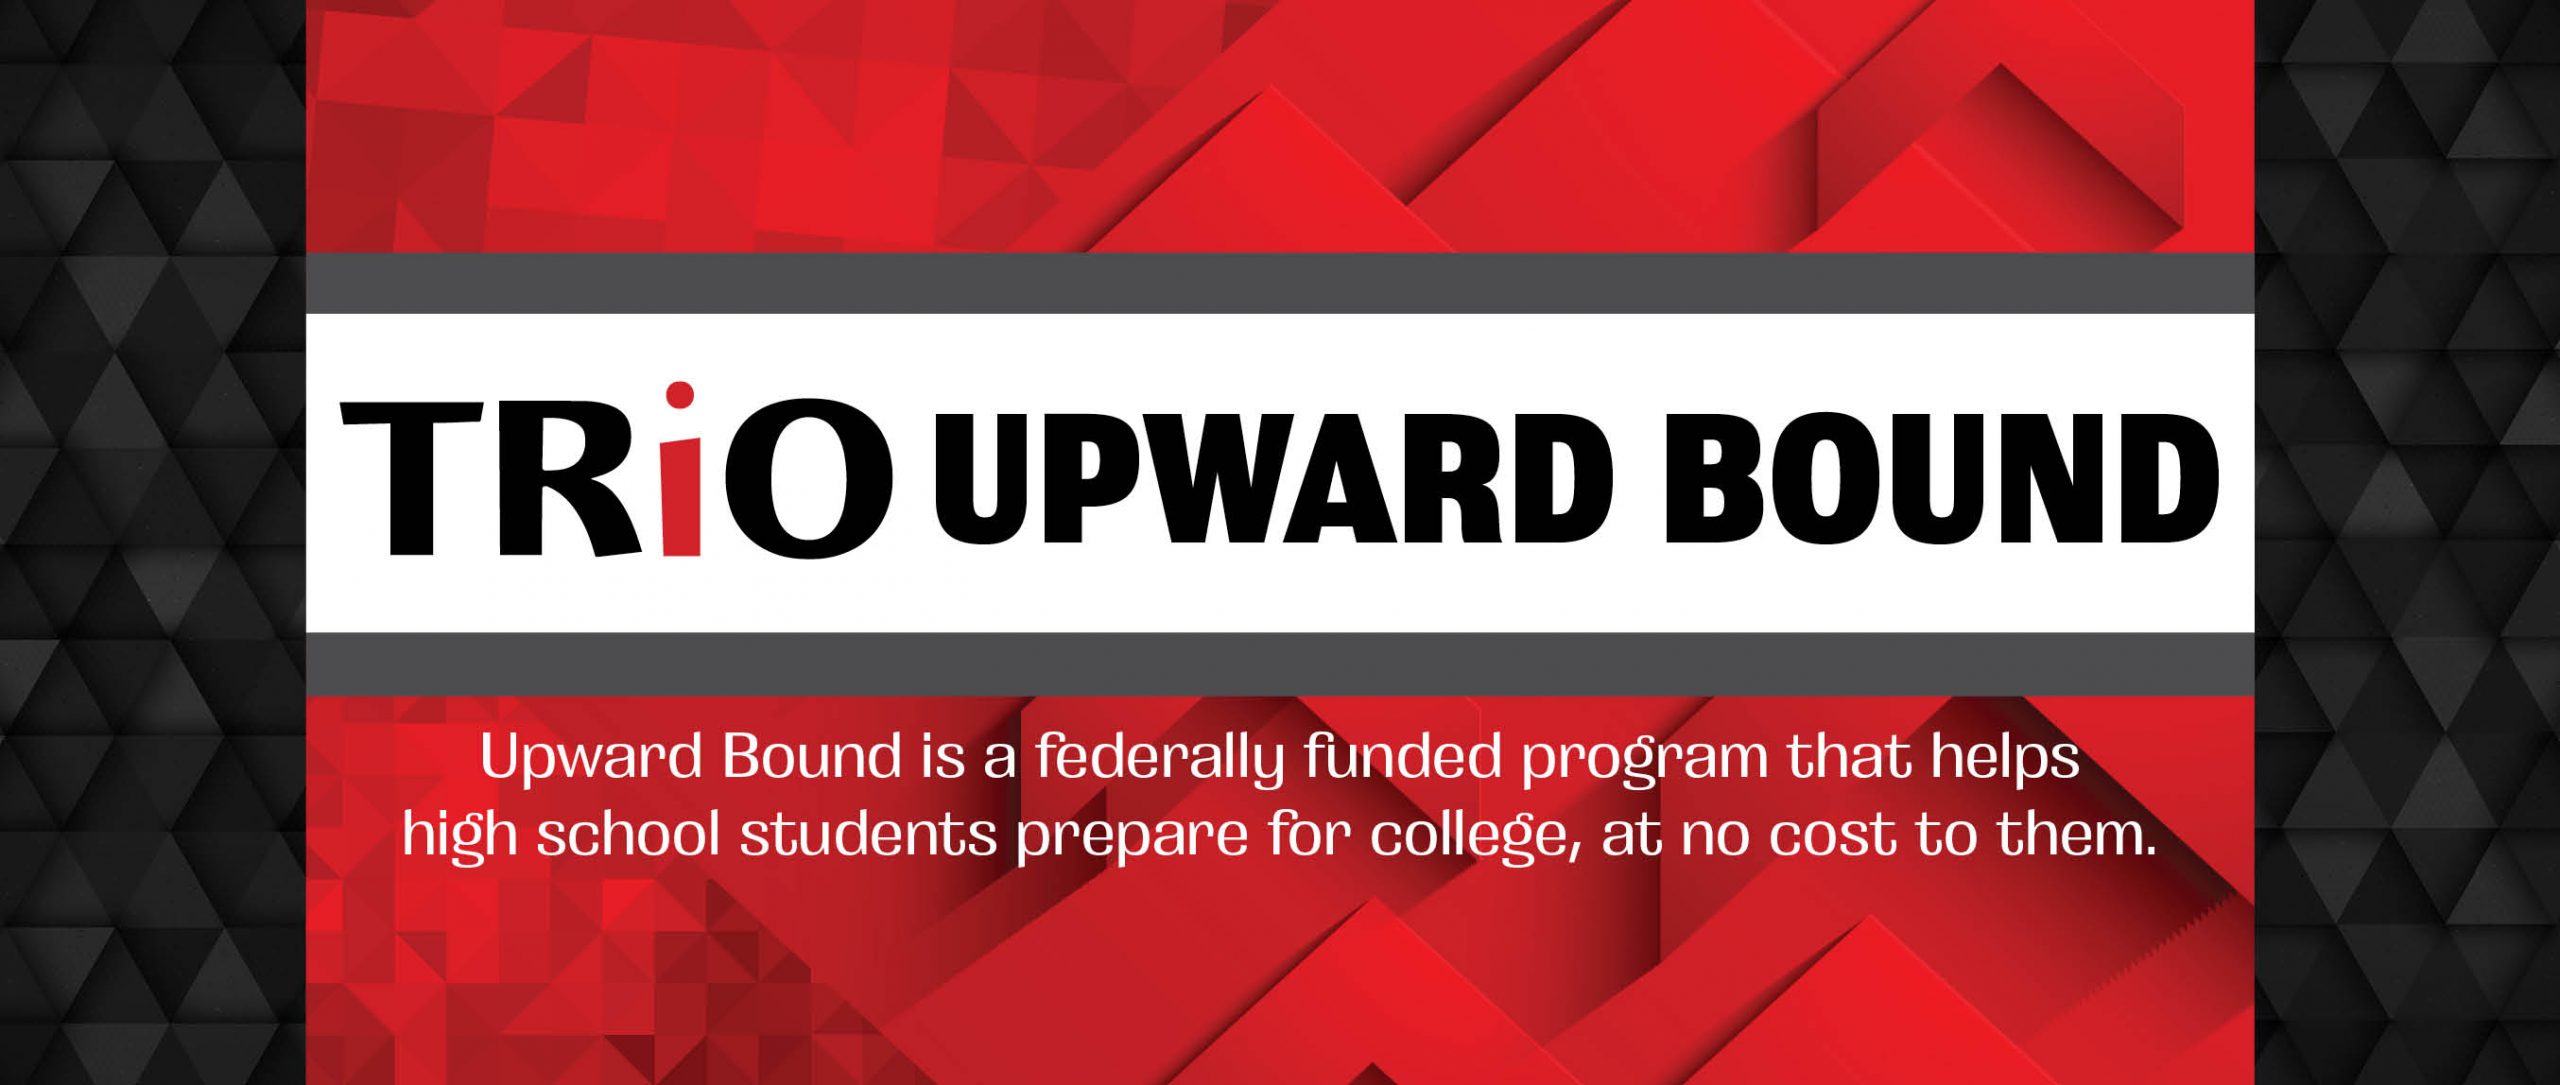 TRiO Upward Bound: Upward Bound is a federally funded program that helps high school students prepare for college, at no cost to them.